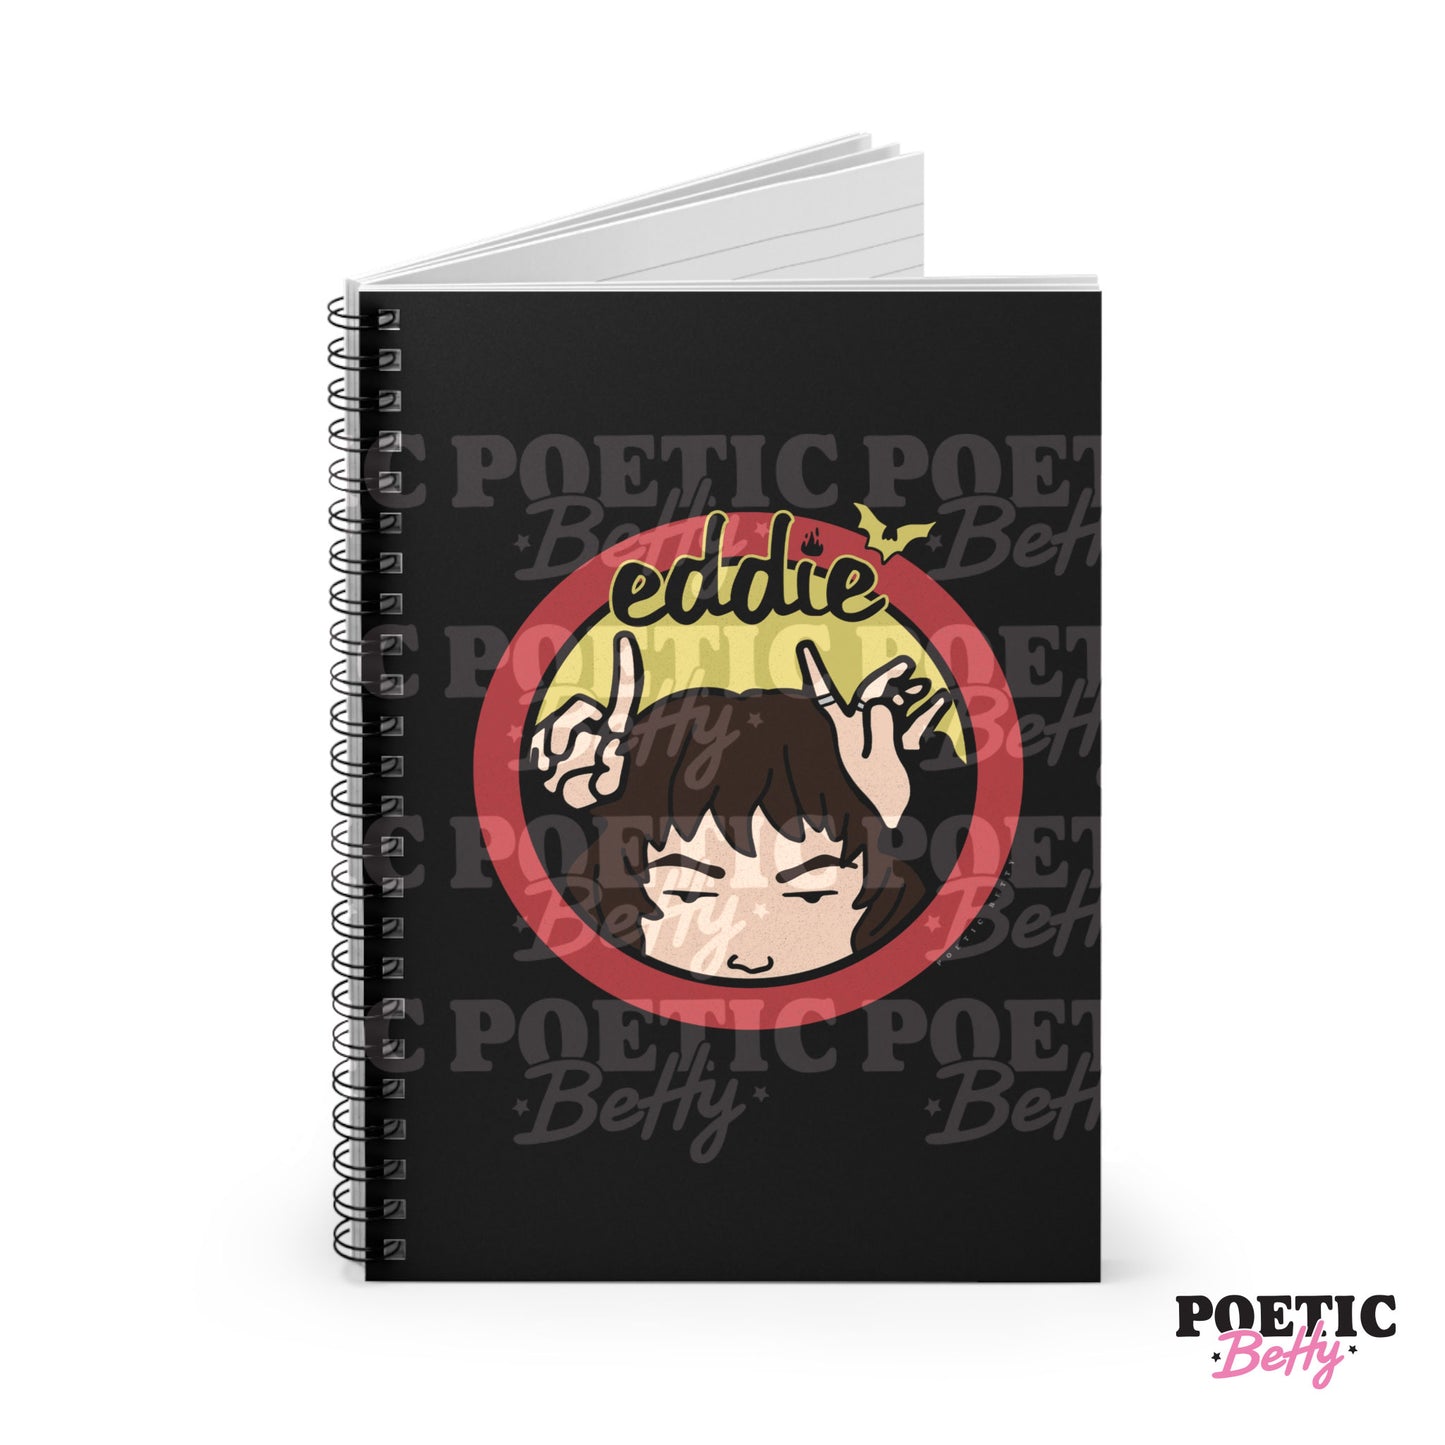 Eddie Back to the 90s Daria Parody Notebook 60 Pages Lined Spiral Bound